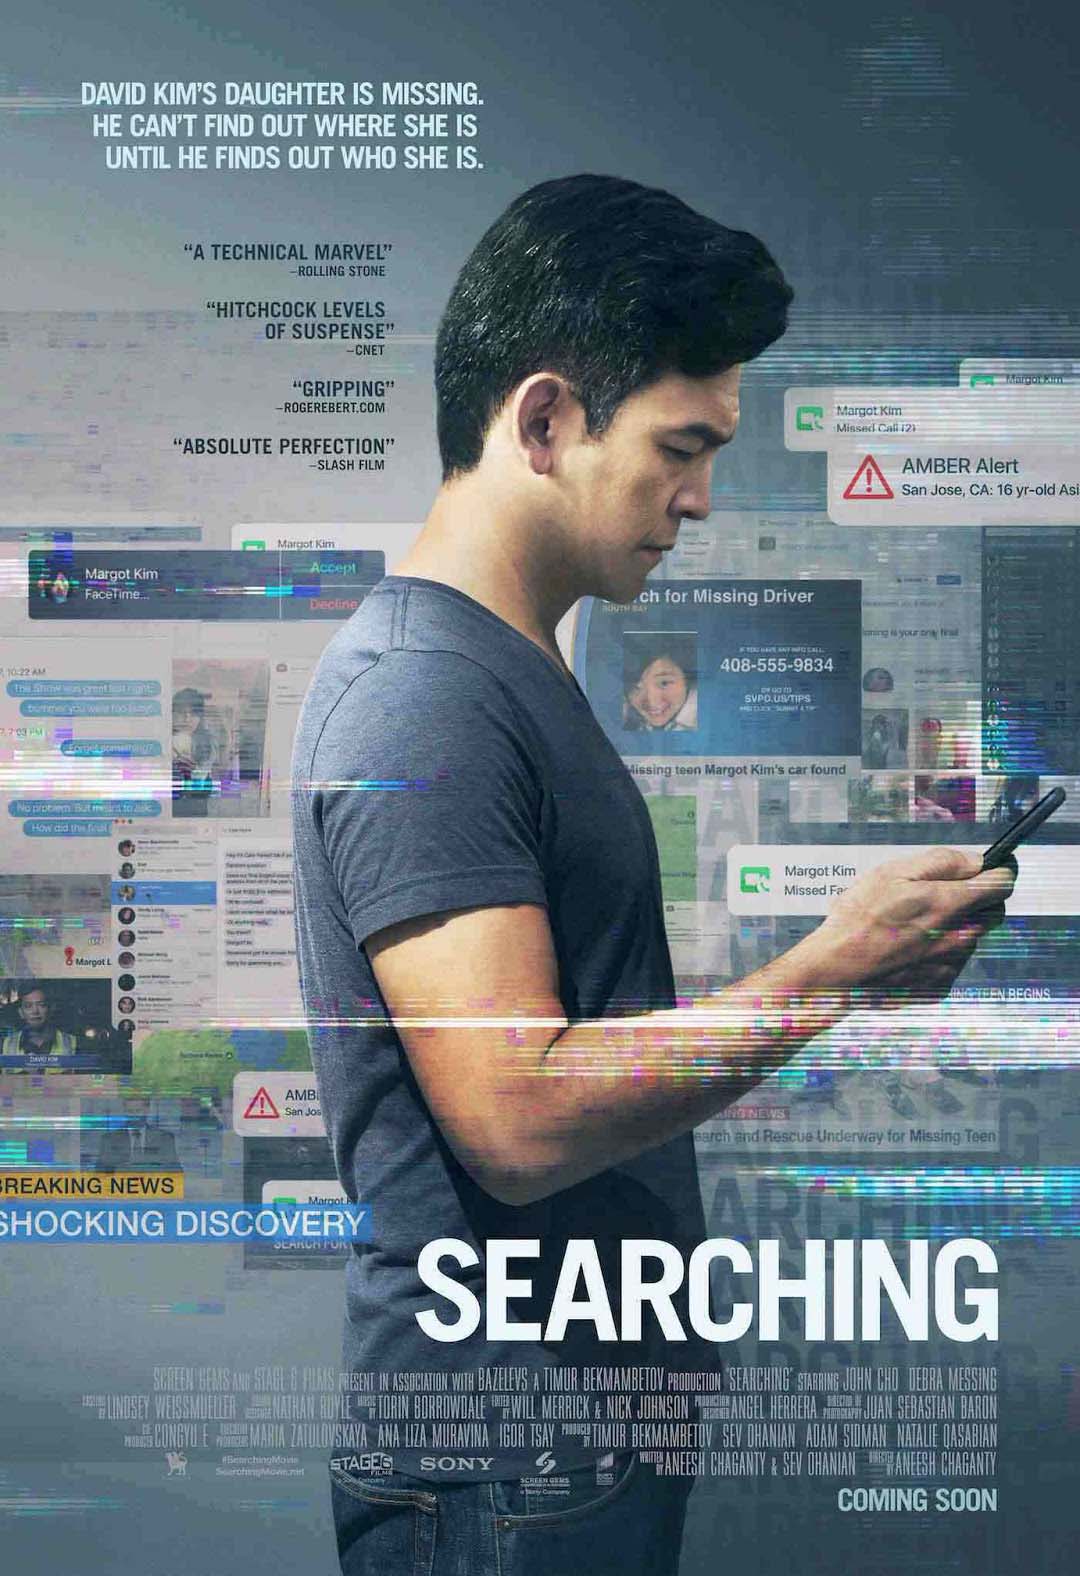 Searching (2018) Official Full Movie Free Online